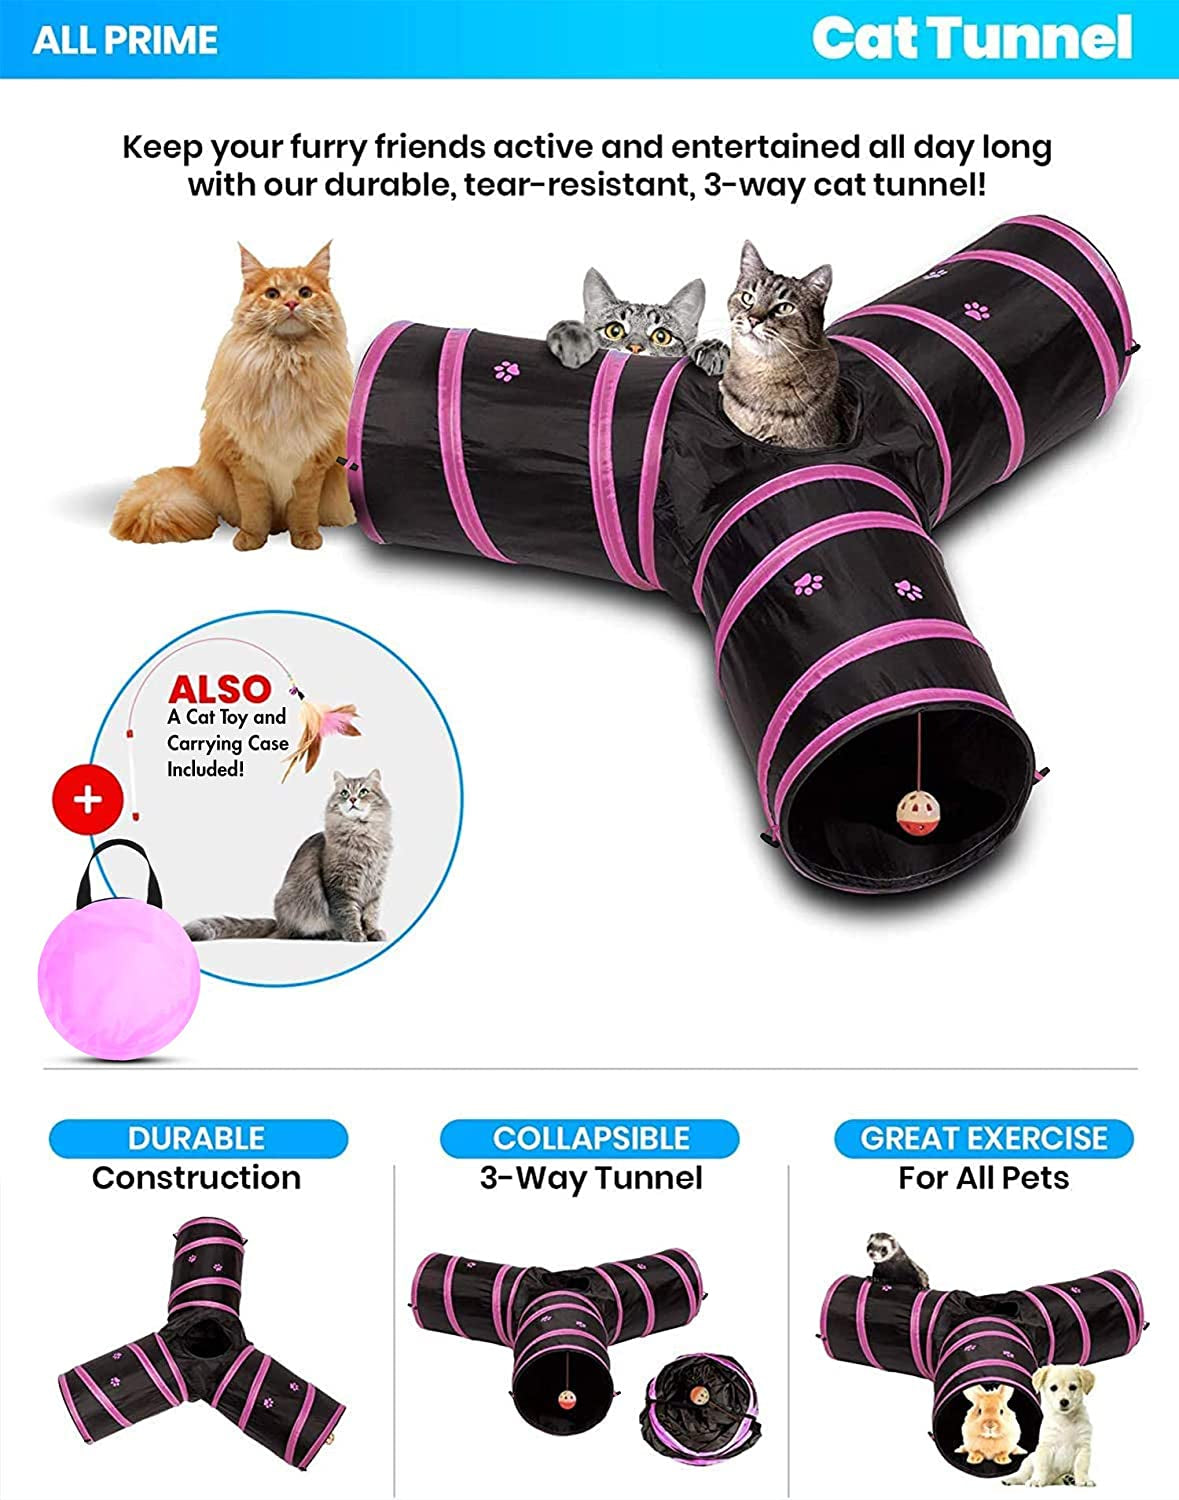 Cat Tunnel - Also Included Is a ($5 Value) Interactive Cat Toy - Toys for Cats - Cat Tunnels for Indoor Cats - Cat Tube - Collapsible 3 Way Pet Tunnel - Great Toy for Cats & Rabb (Pink)